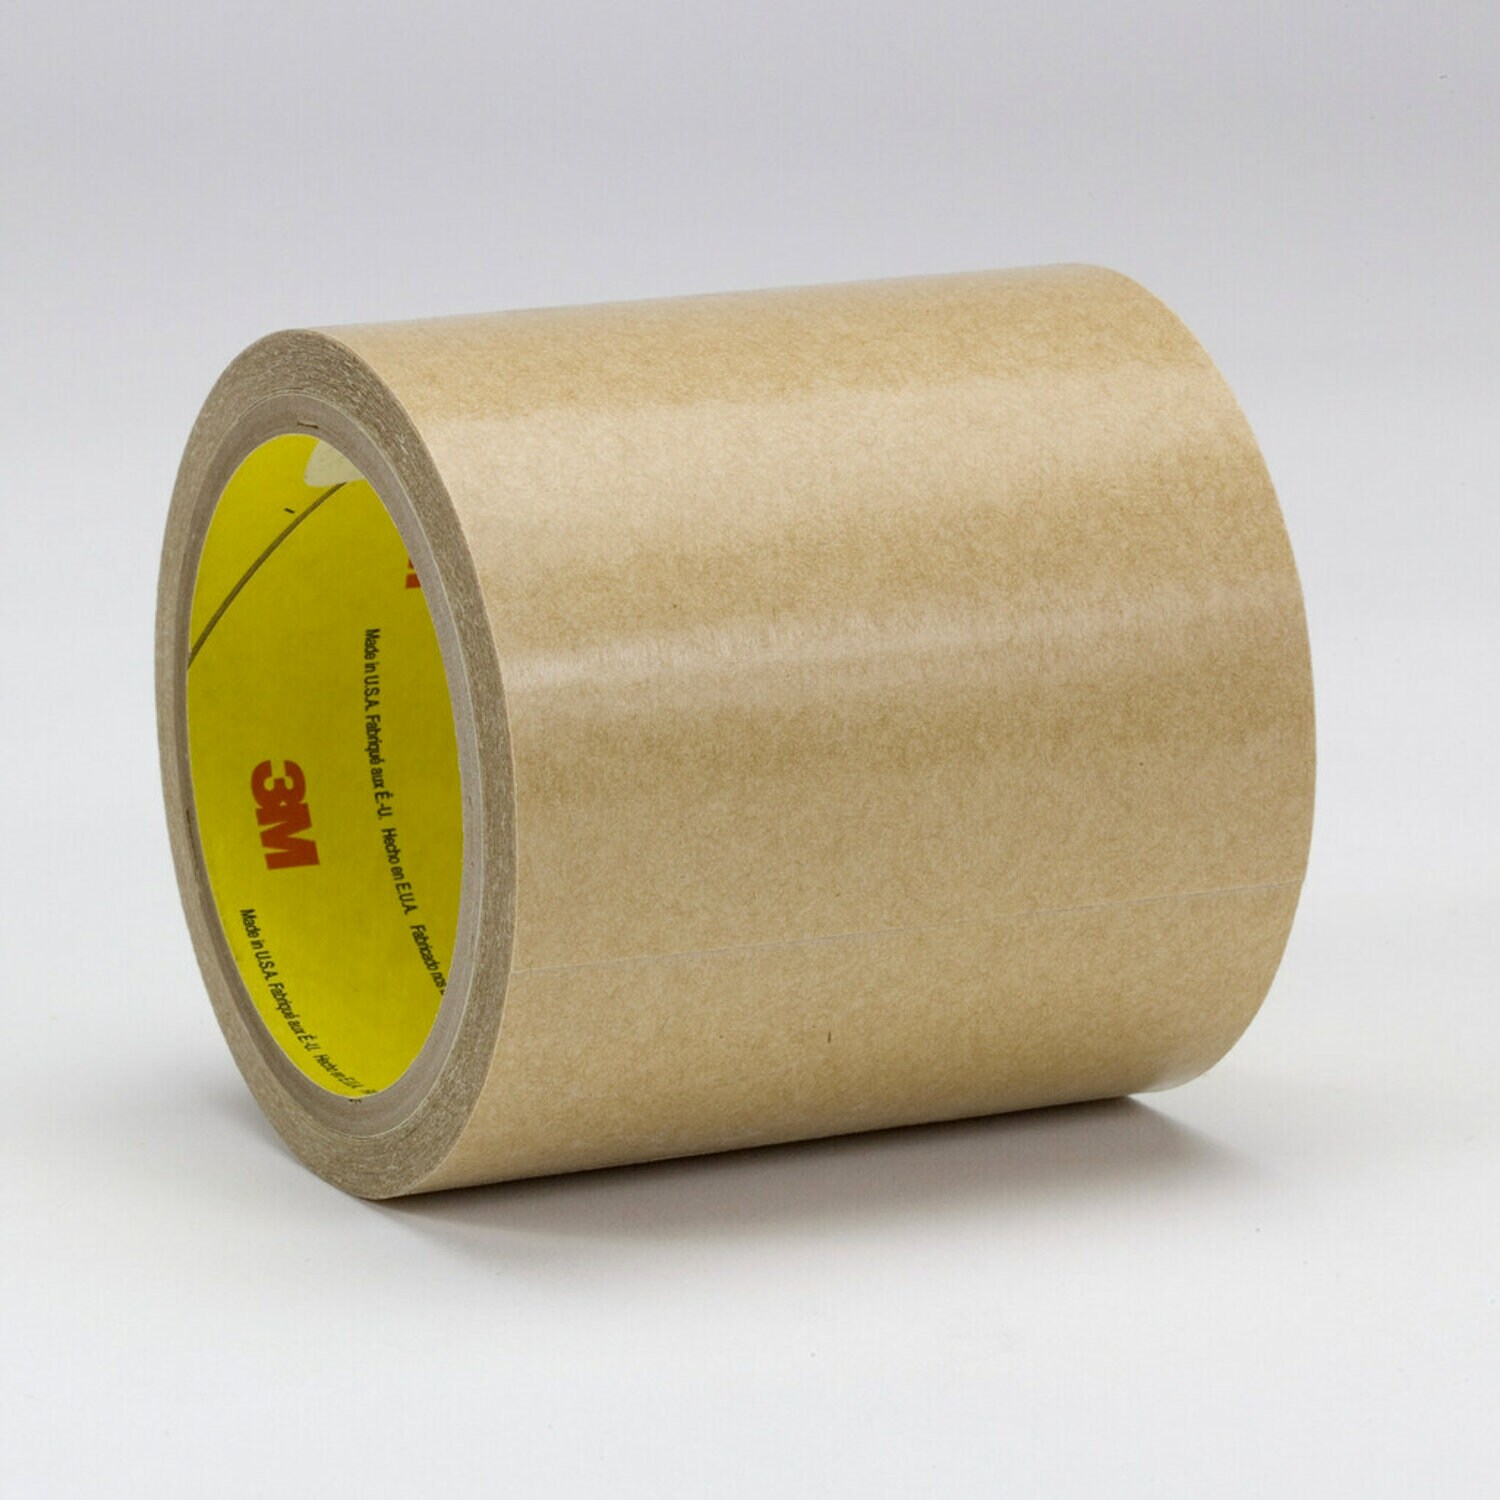 7000123474 - 3M Adhesive Transfer Tape 9671, Clear, 24 in x 60 yd, 2 mil, Layflat, 1
roll per case